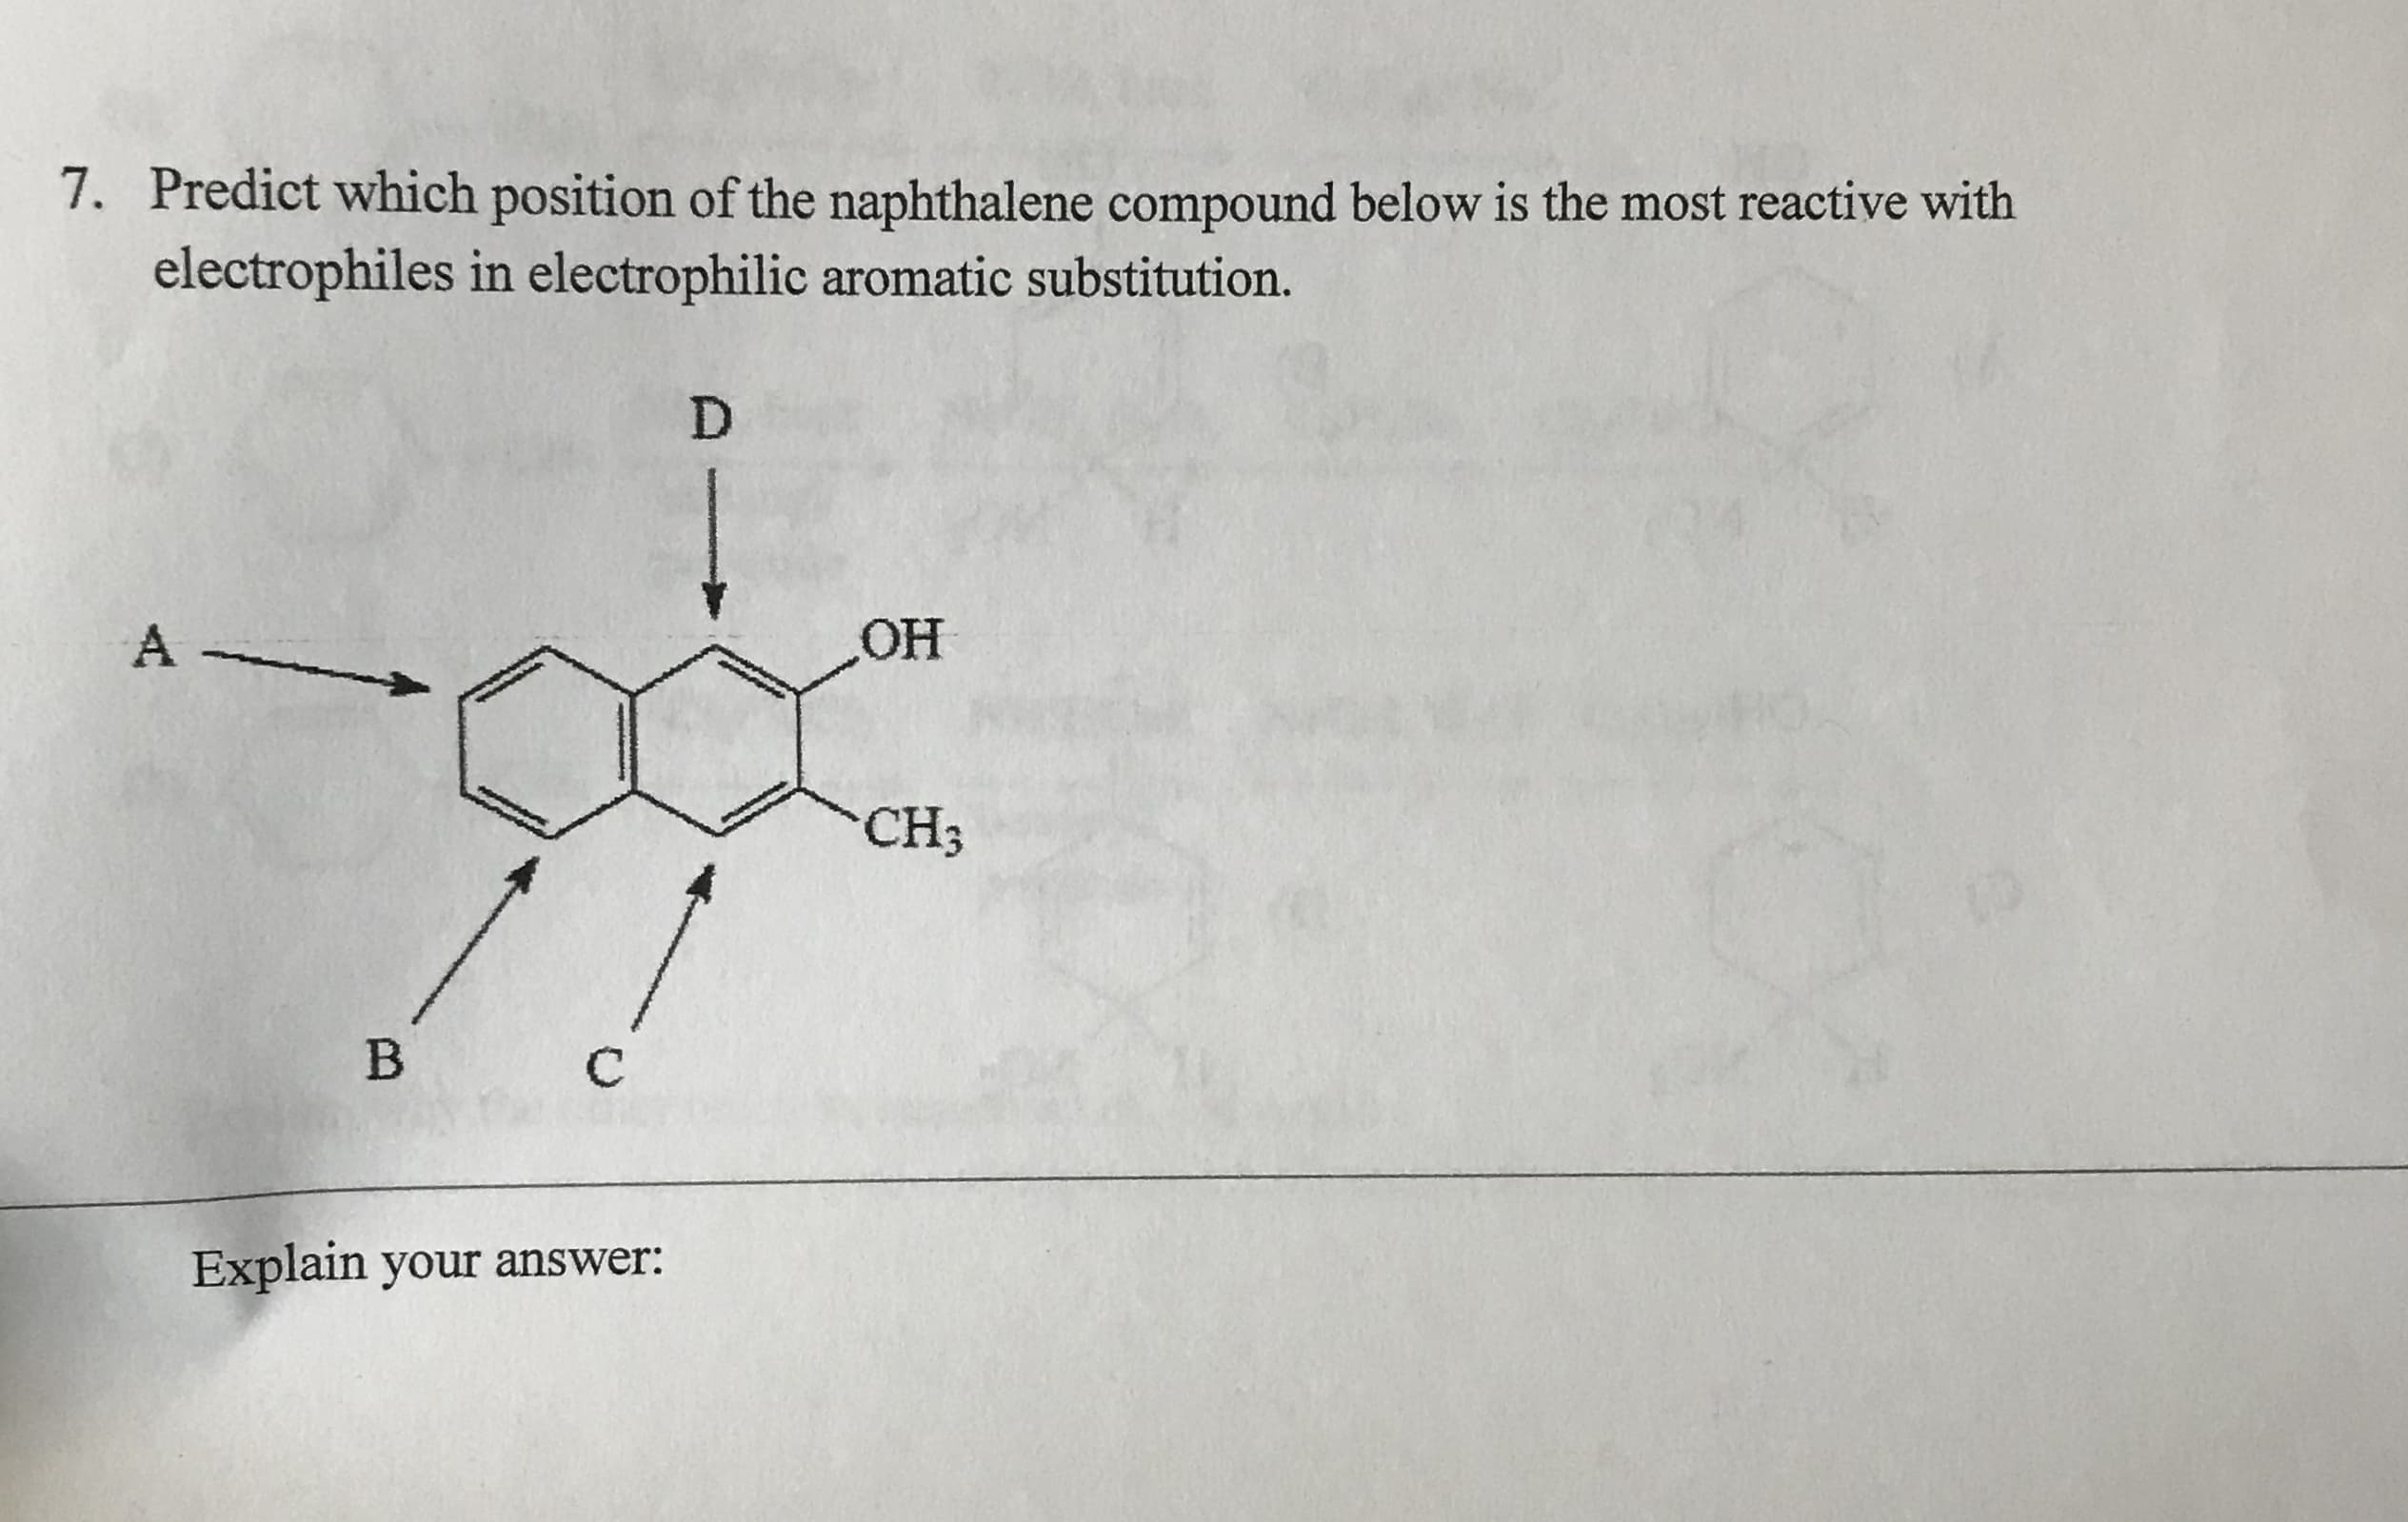 7.
Predict which position of the naphthalene compound below is the most reactive with
electrophiles in electrophilic aromatic substitution.
D
OH
A
CH3
B
C
Explain your answer:
